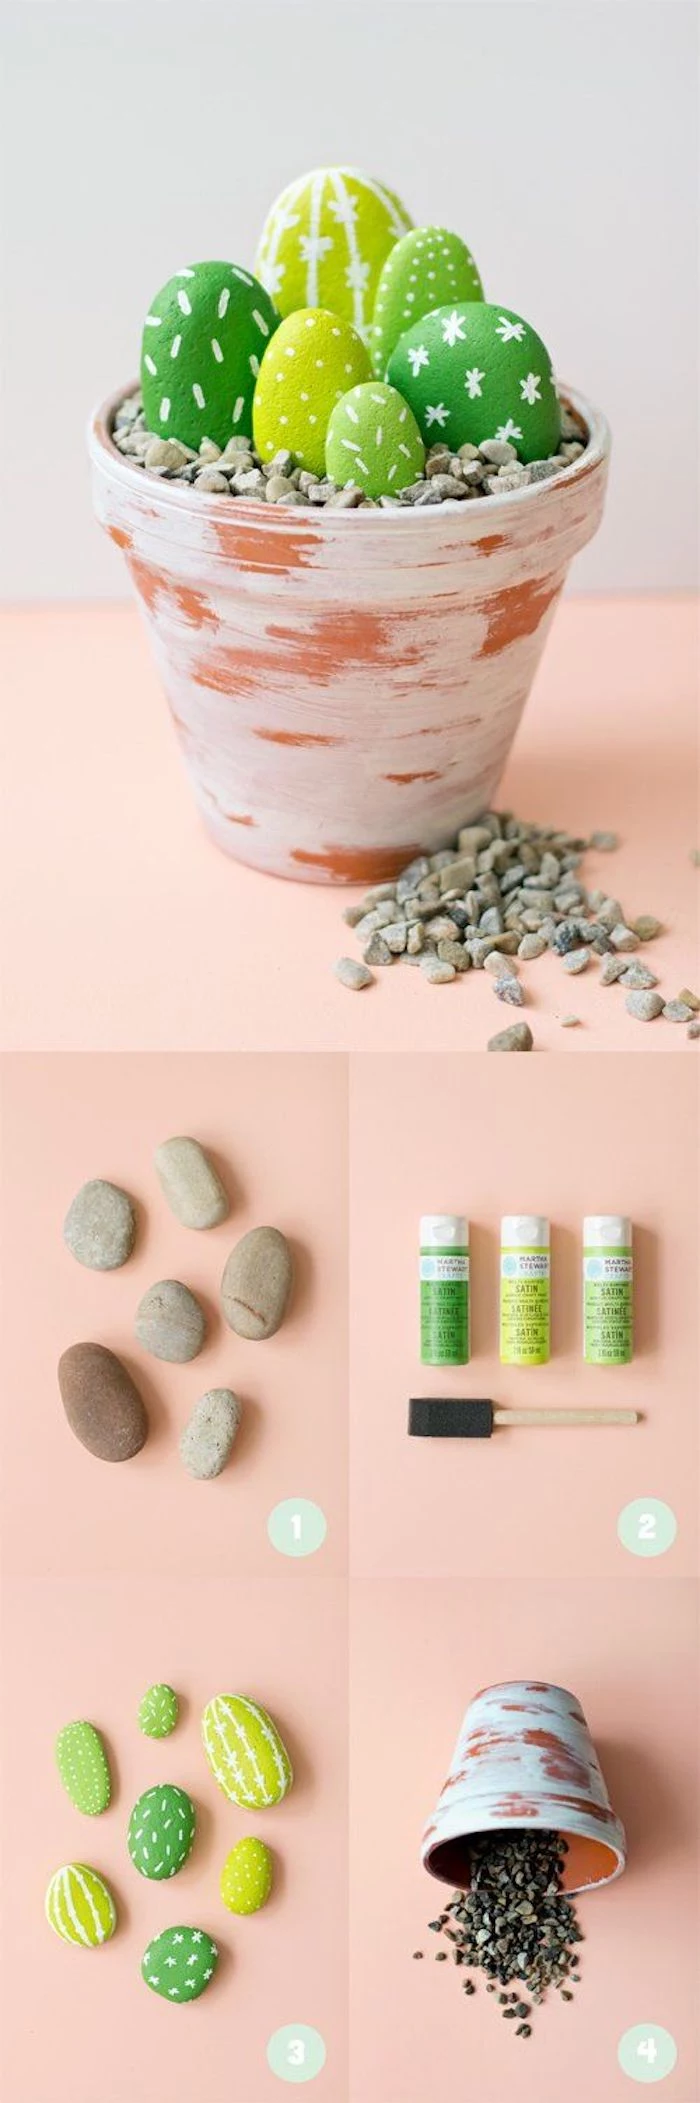 ceramic pot, green cactuses, made of rocks, arts and crafts for toddlers, step by step, diy tutorial